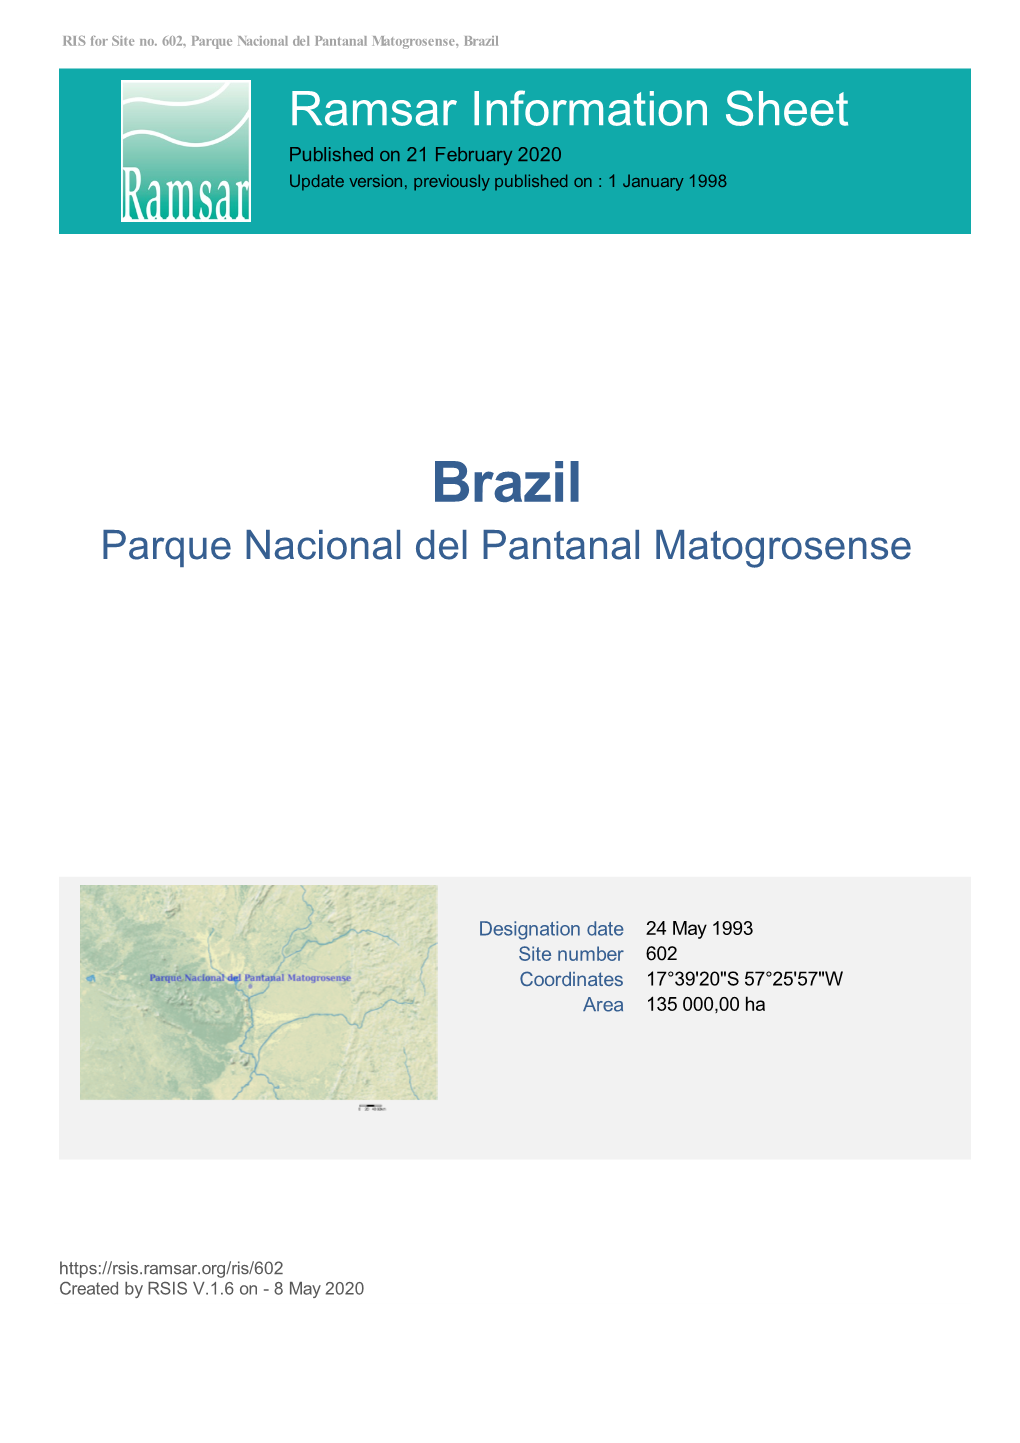 Brazil Ramsar Information Sheet Published on 21 February 2020 Update Version, Previously Published on : 1 January 1998